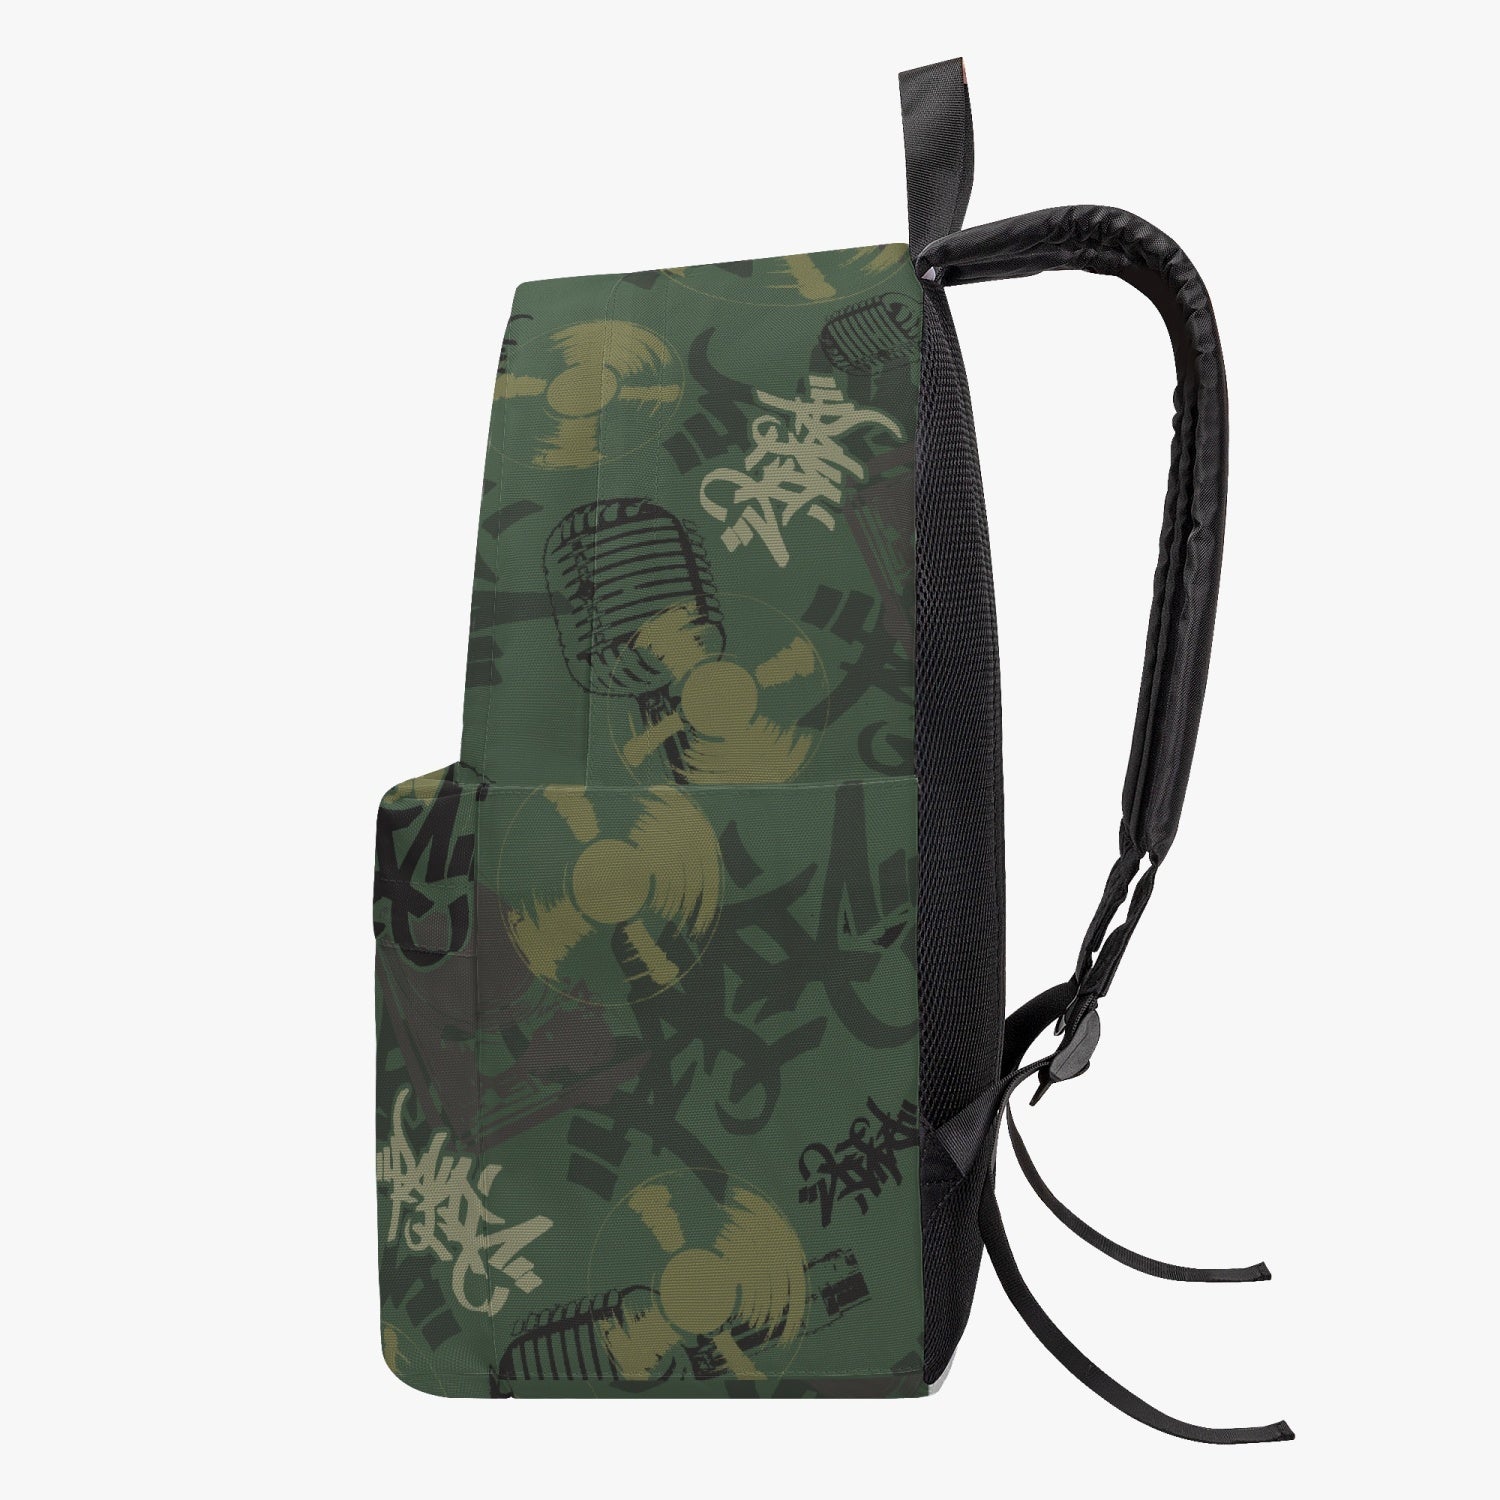 THE ELEMENT GREEN CAMO CANVAS BACKPACK - Panic 39